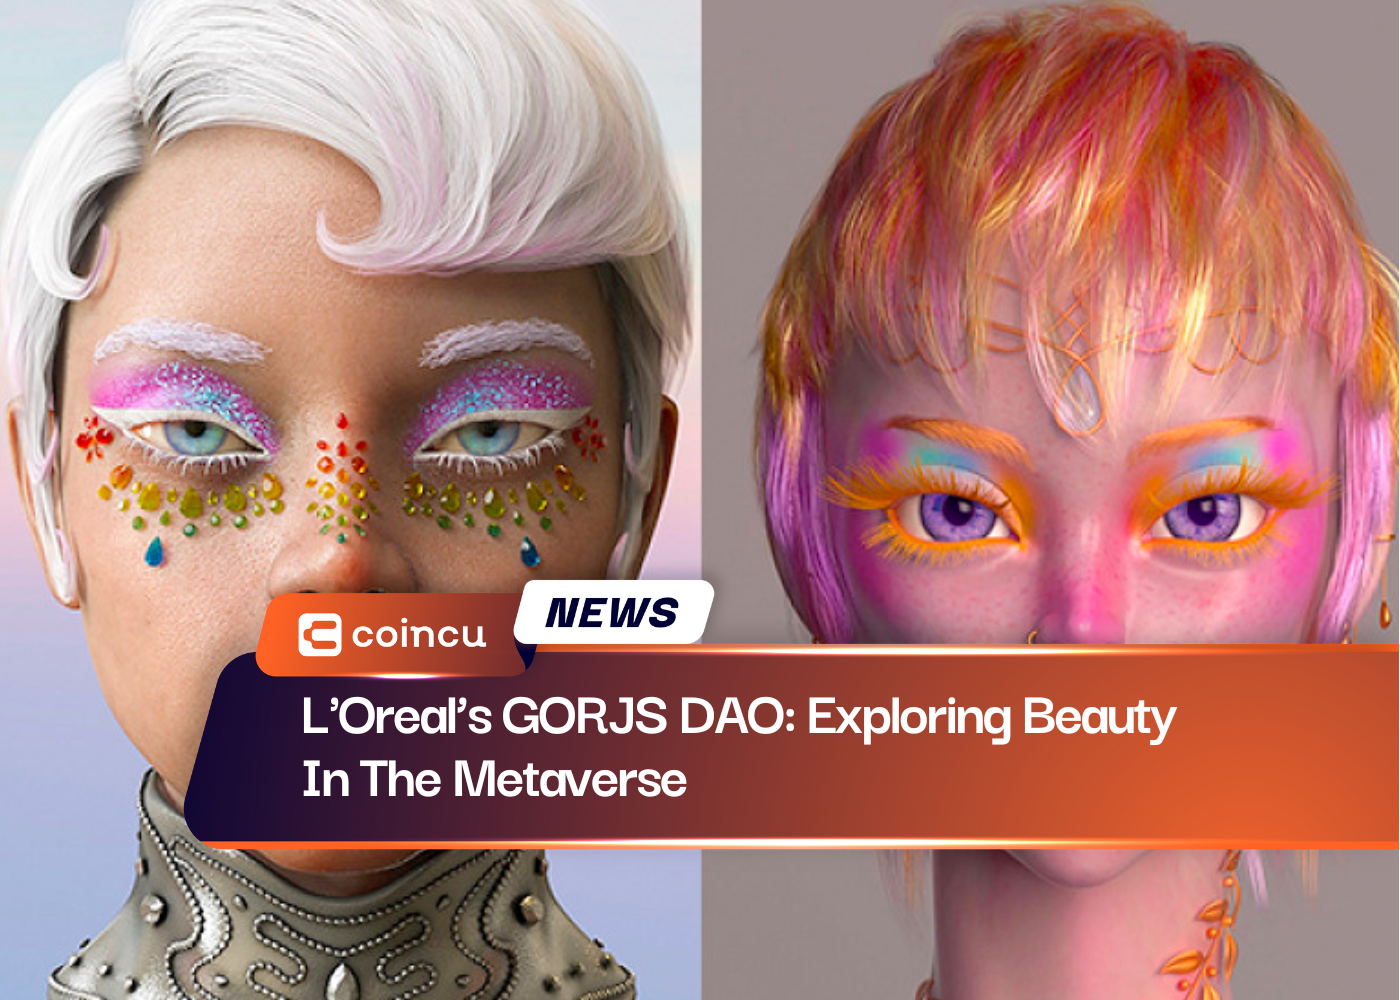 L'Oreal’s GORJS DAO: Exploring Beauty In The Metaverse